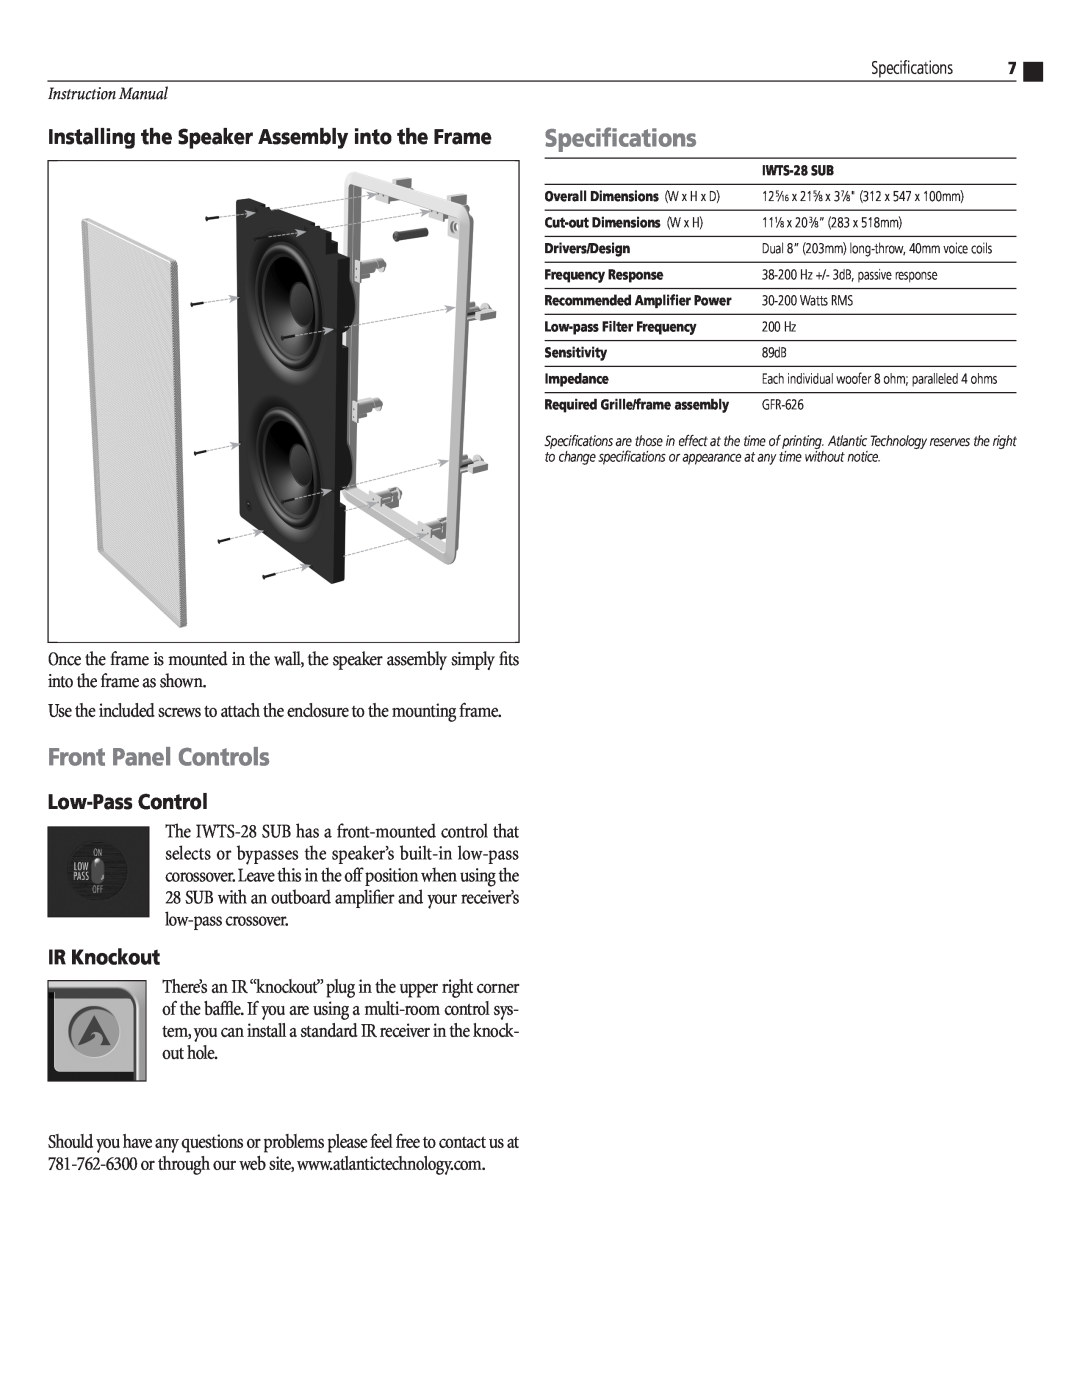 Atlantic Technology IWTS-28 SUB Specifications, Front Panel Controls, Installing the Speaker Assembly into the Frame 